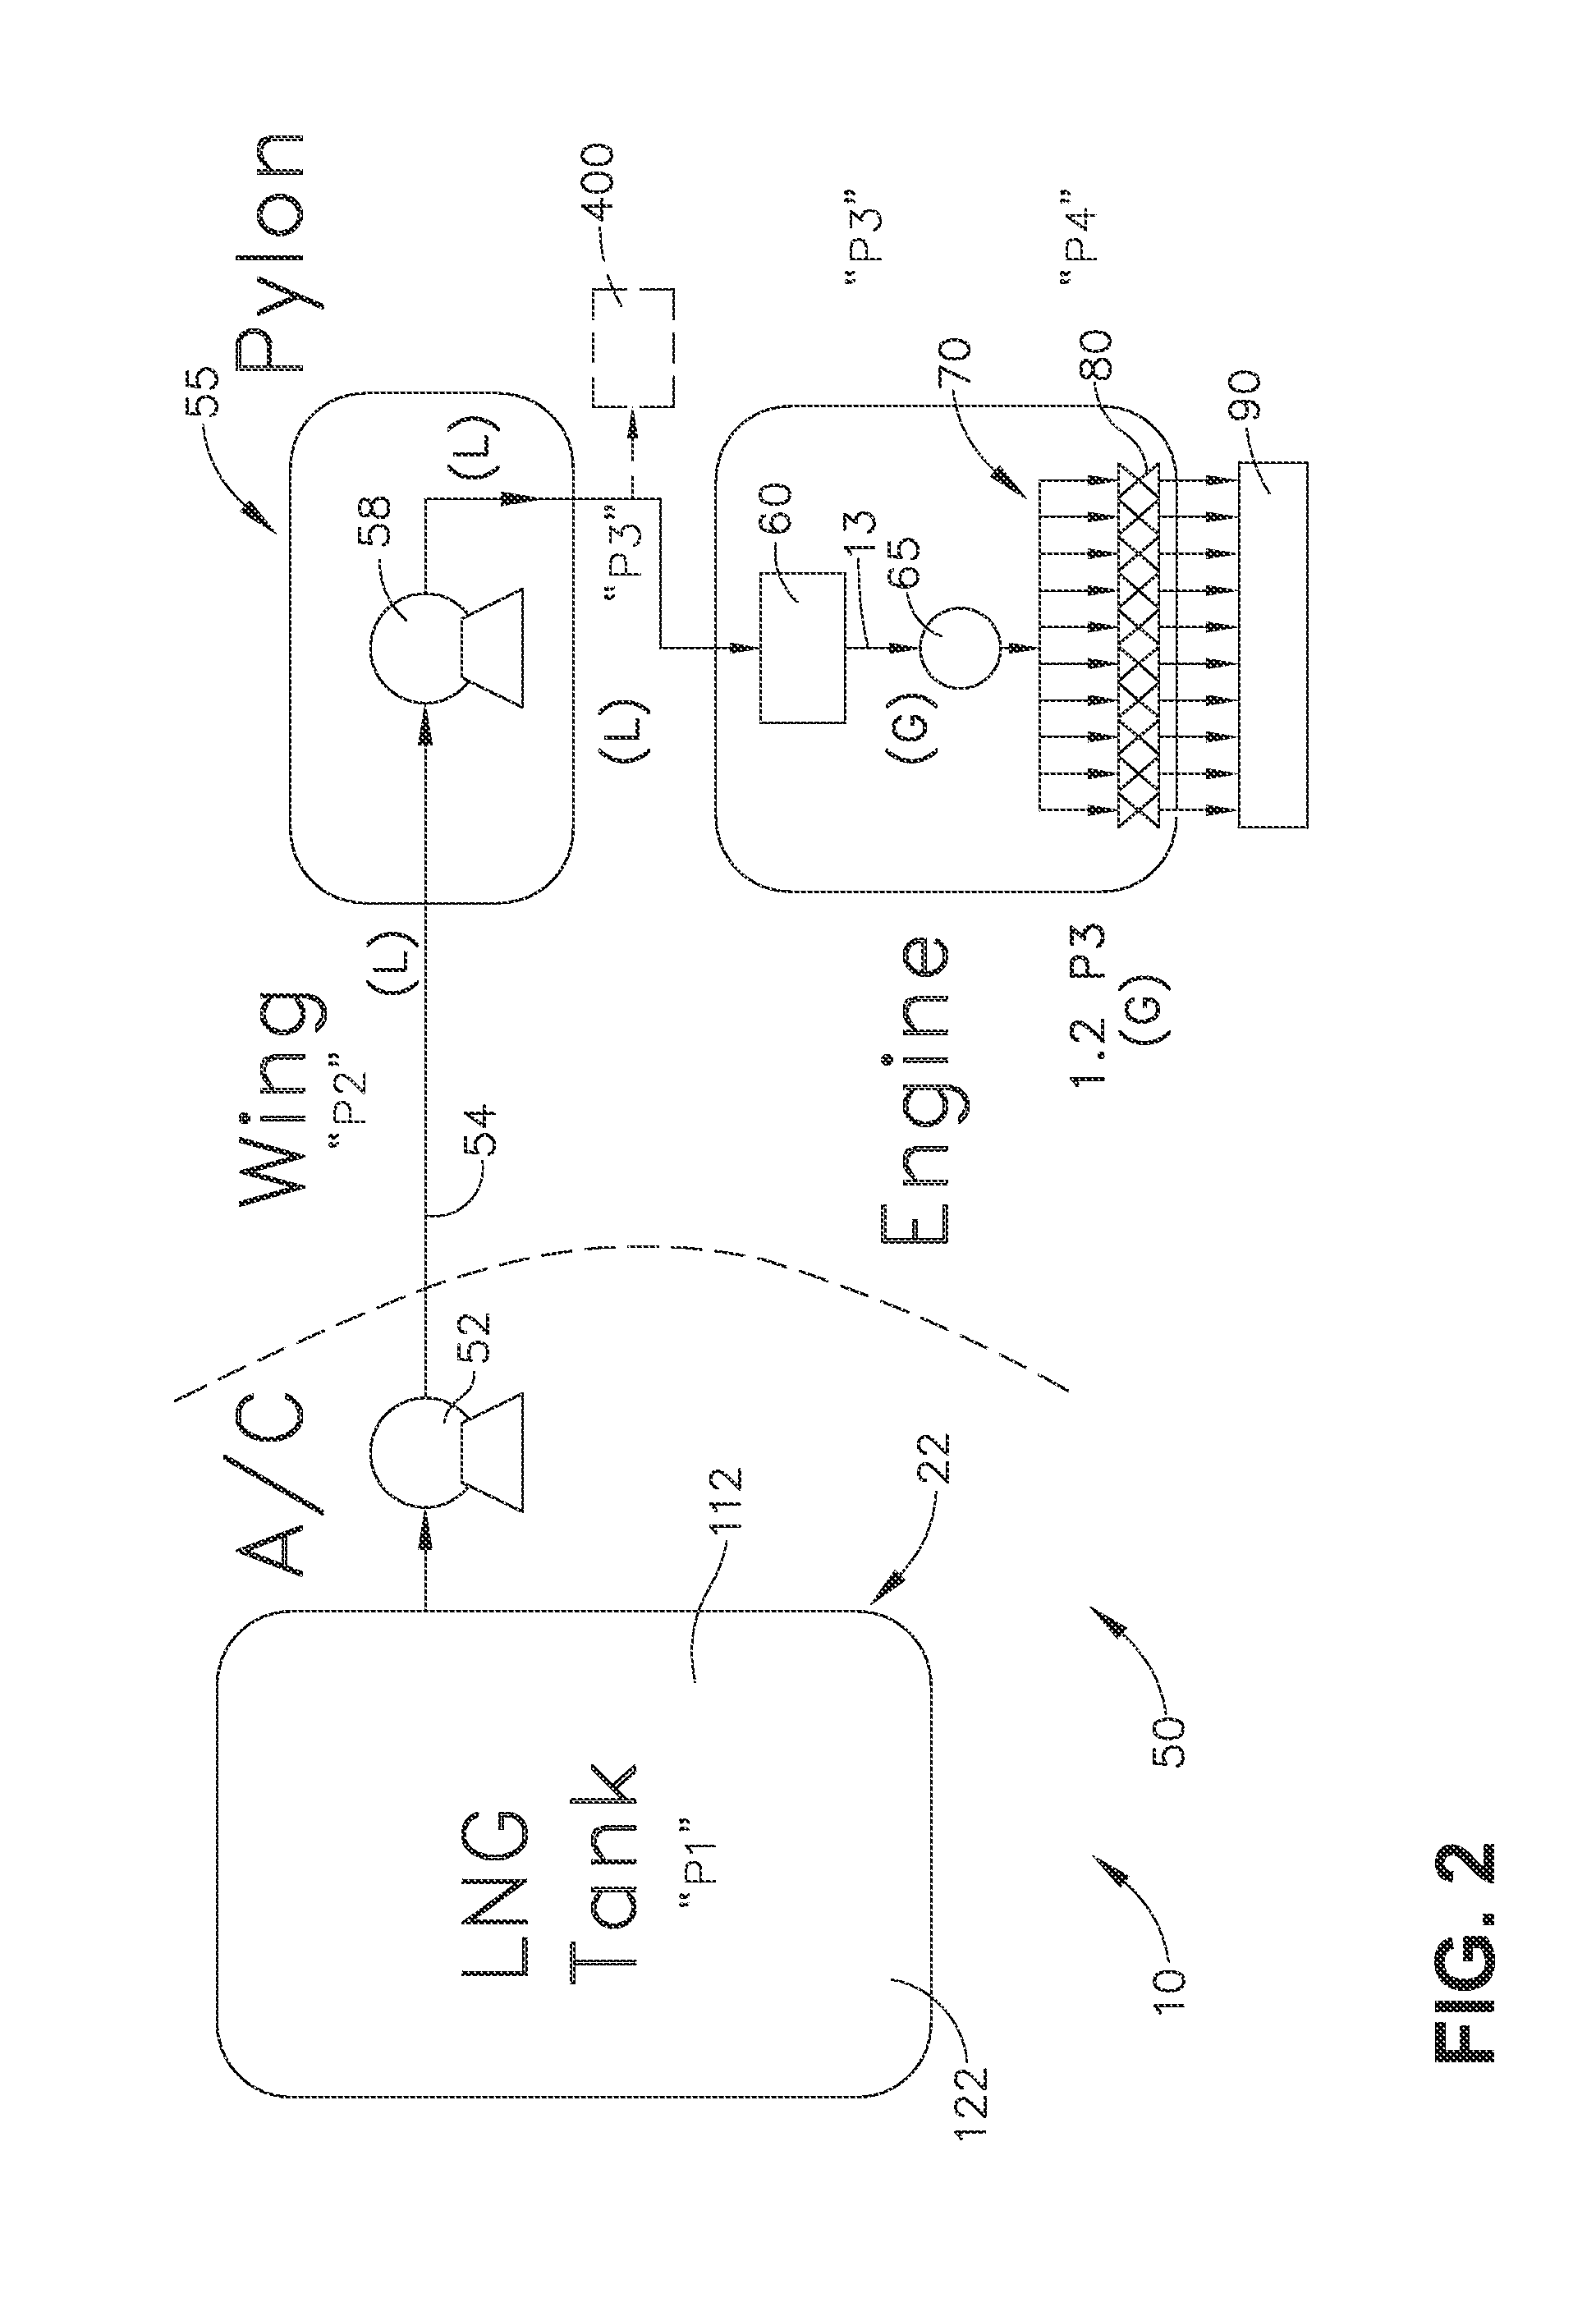 Cryogenic fuel compositions and dual fuel aircraft system